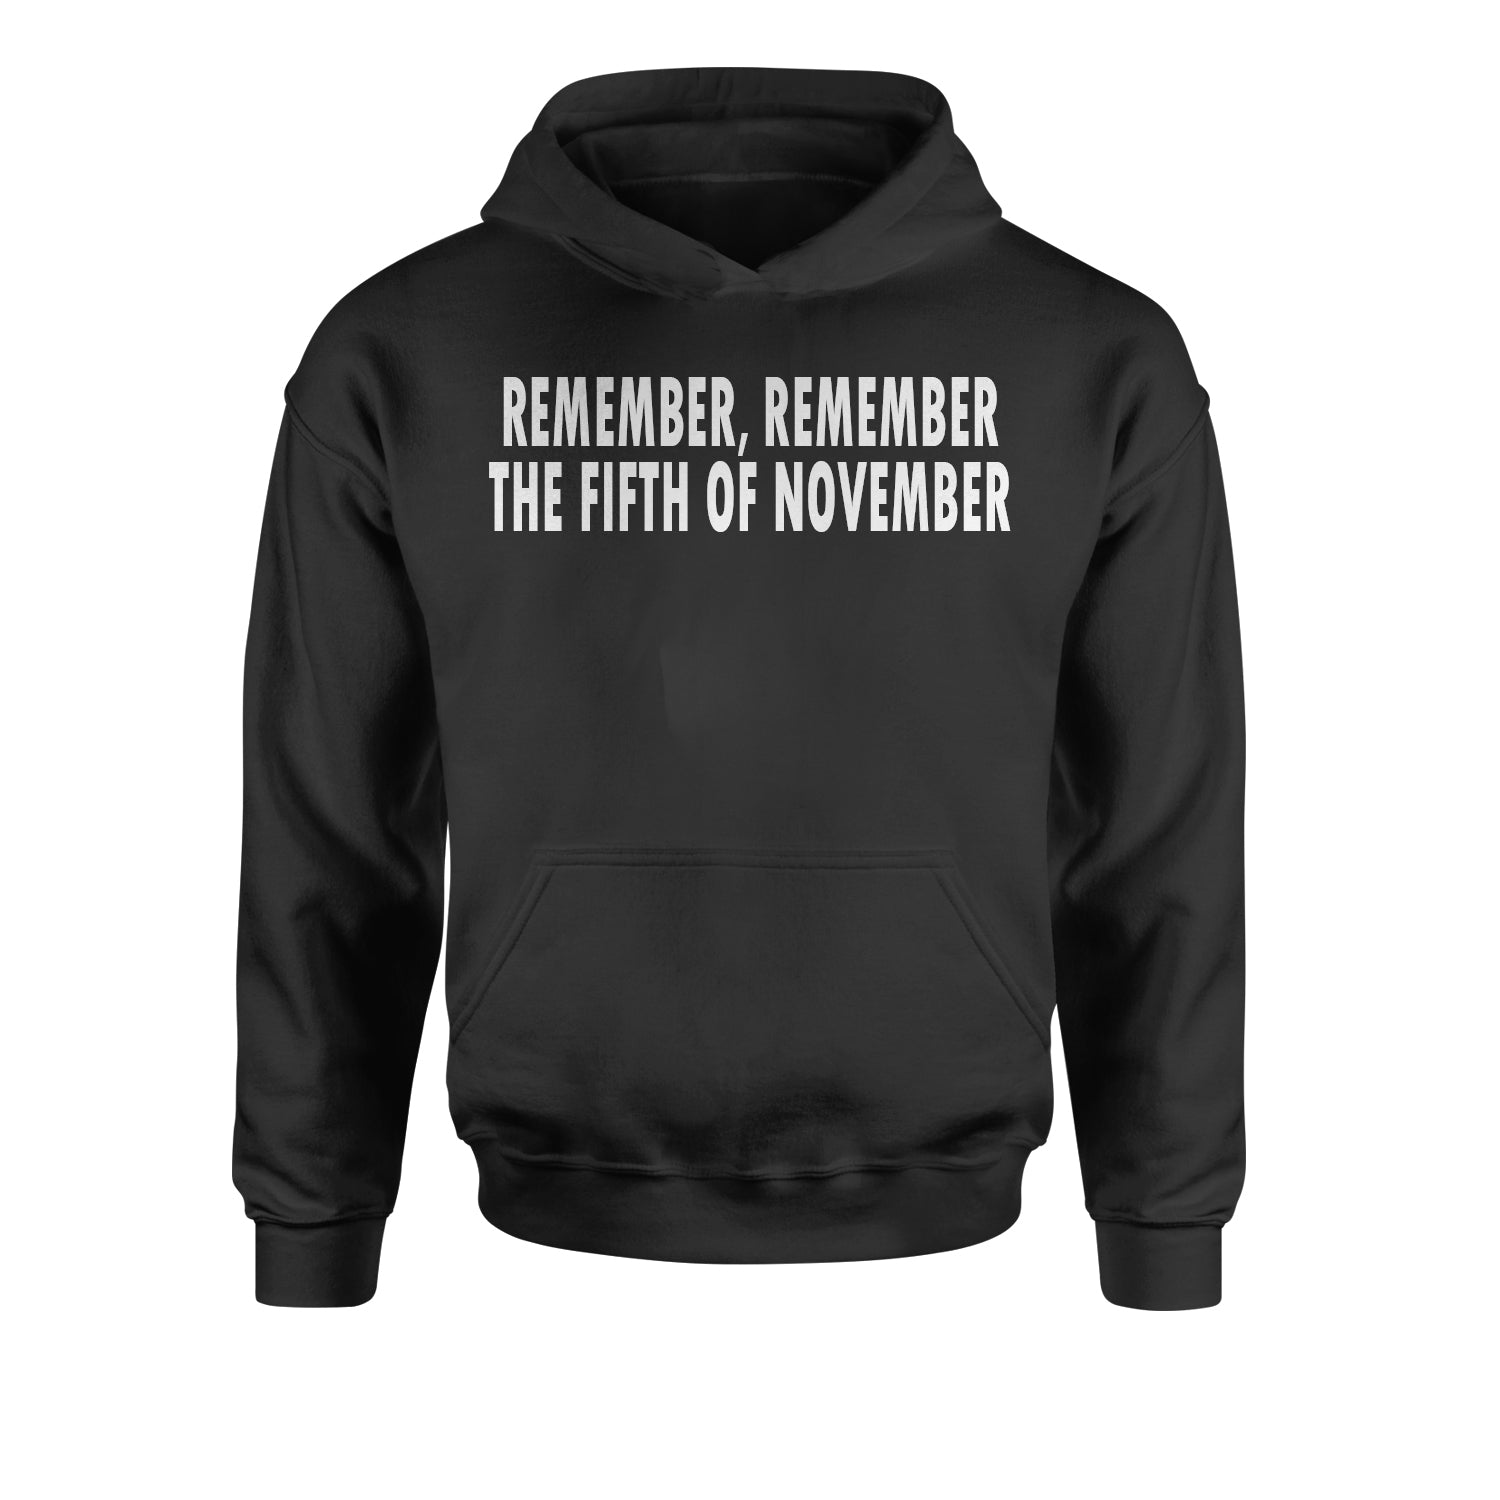 Remember The Fifth Of November Youth-Sized Hoodie for, v, vendetta, vforvendetta, youth-sized by Expression Tees